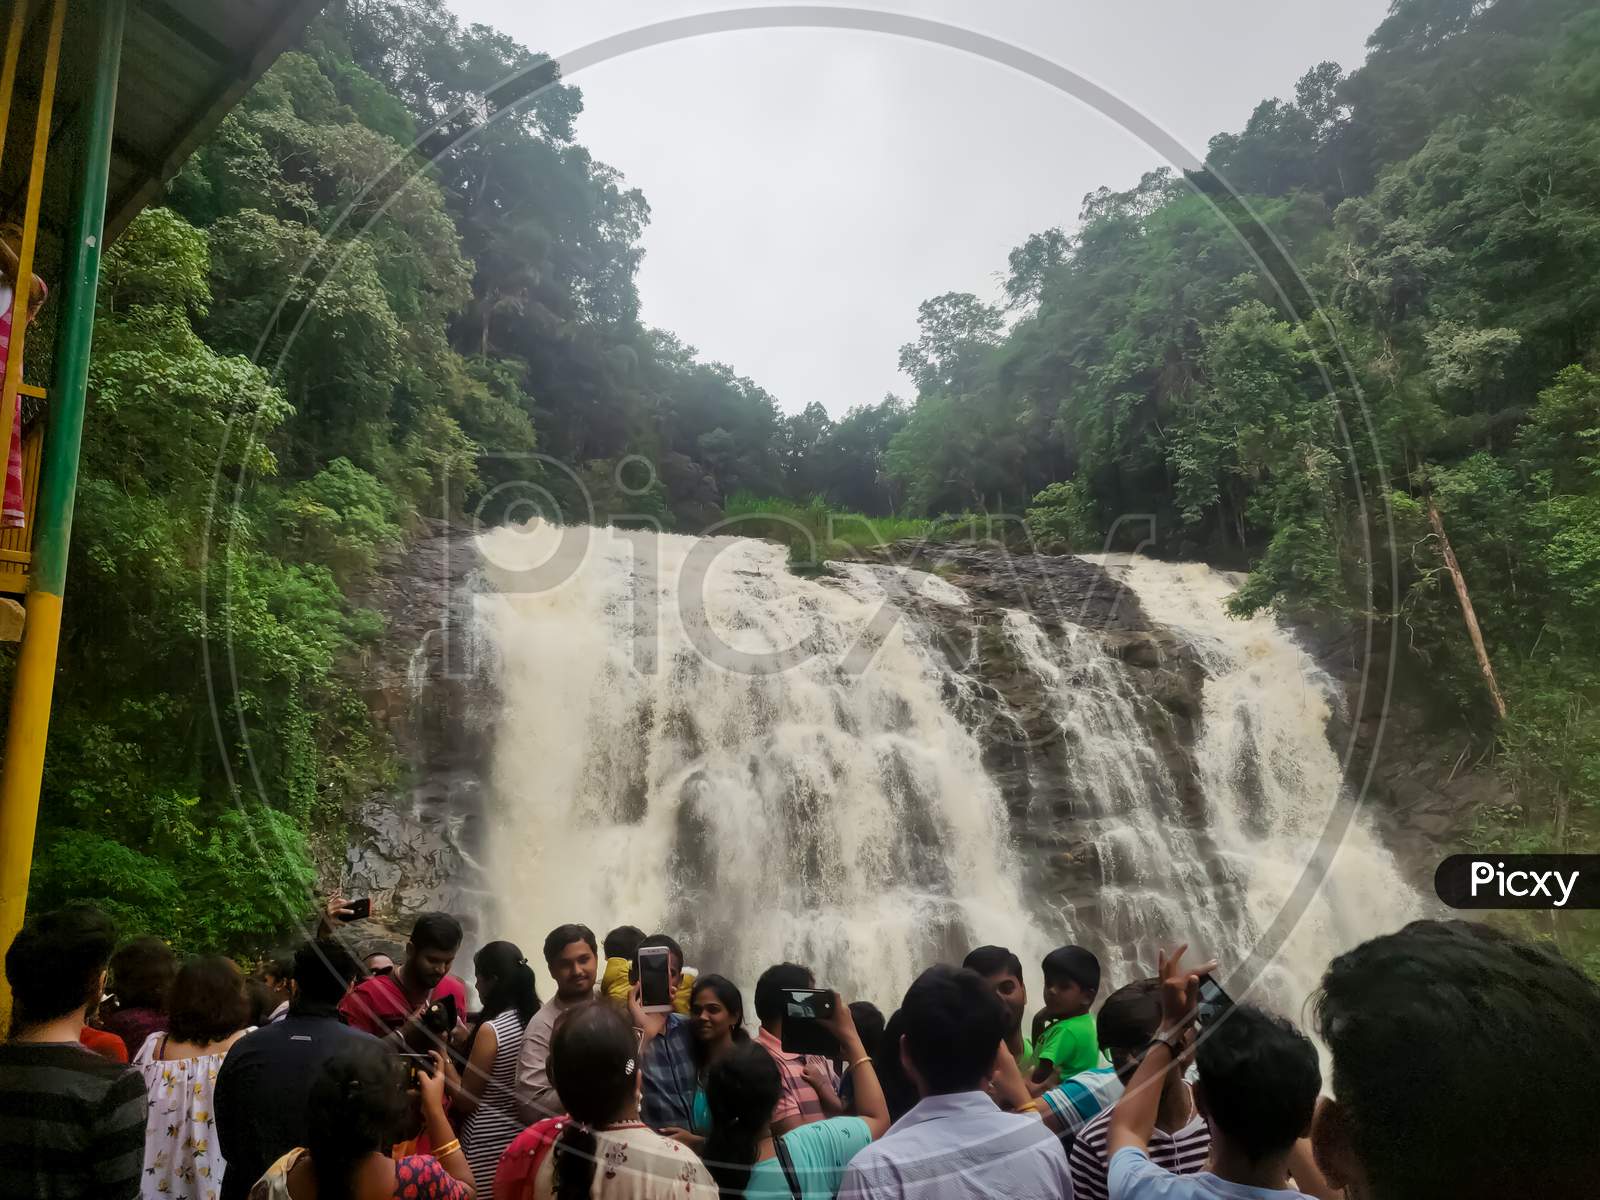 July 6, 2019- Karnataka, India: An Image Of A Abbey Waterfalls Covered With Green Forest In Coorg, Karnataka, India With People Watching Its Beauty.